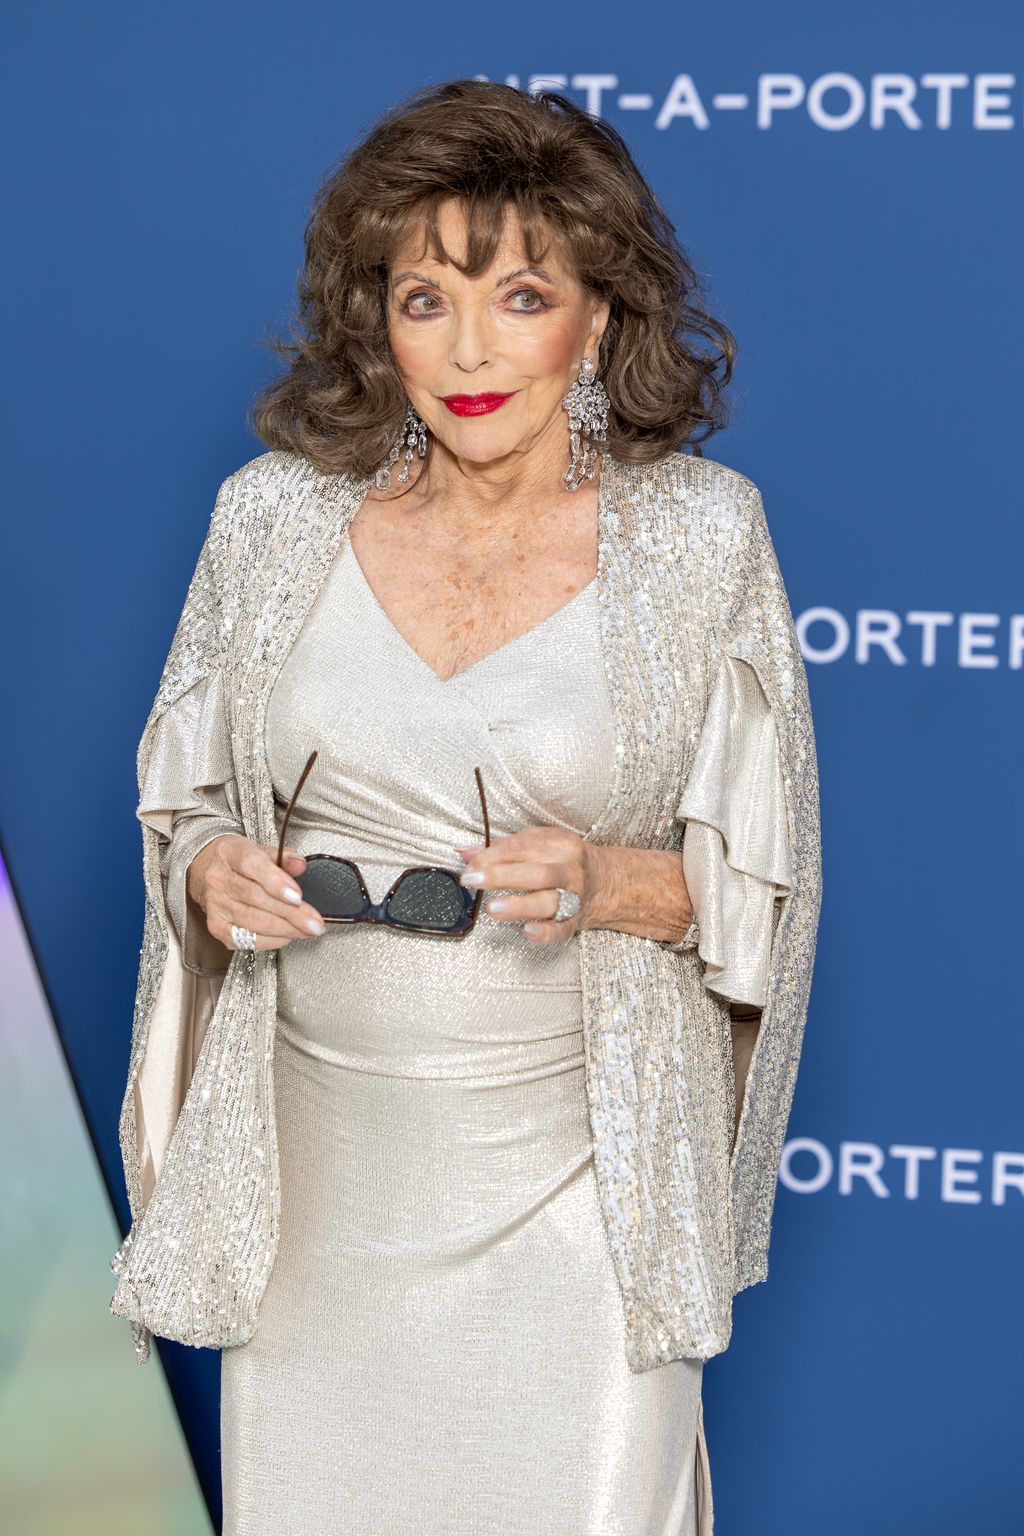 Joan Collins in a shimmering white outfit holding her sunglasses